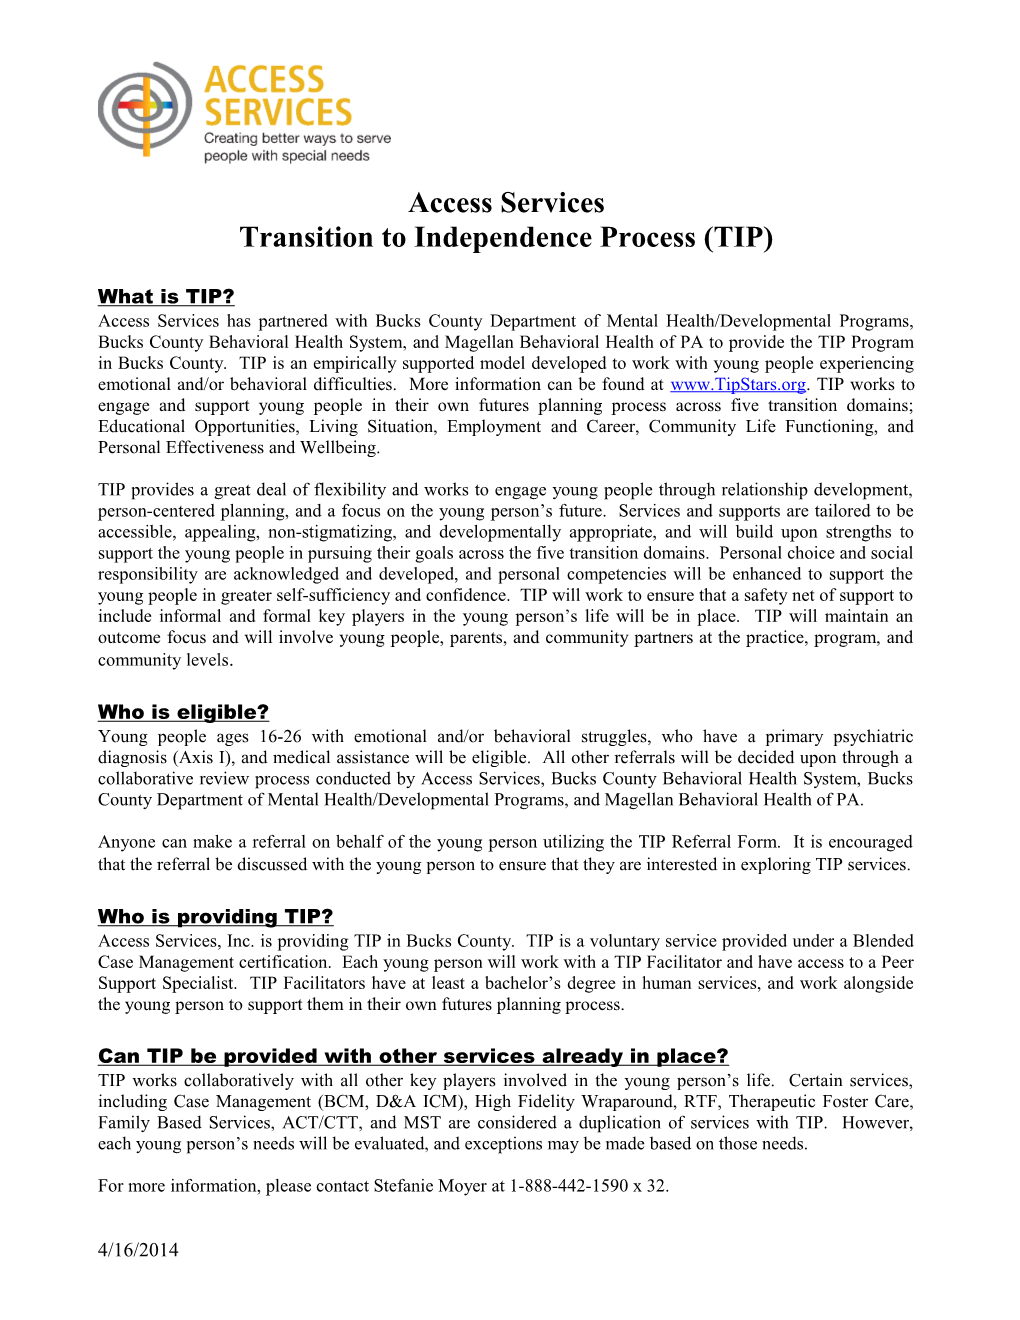 Transition to Independence Process (TIP)